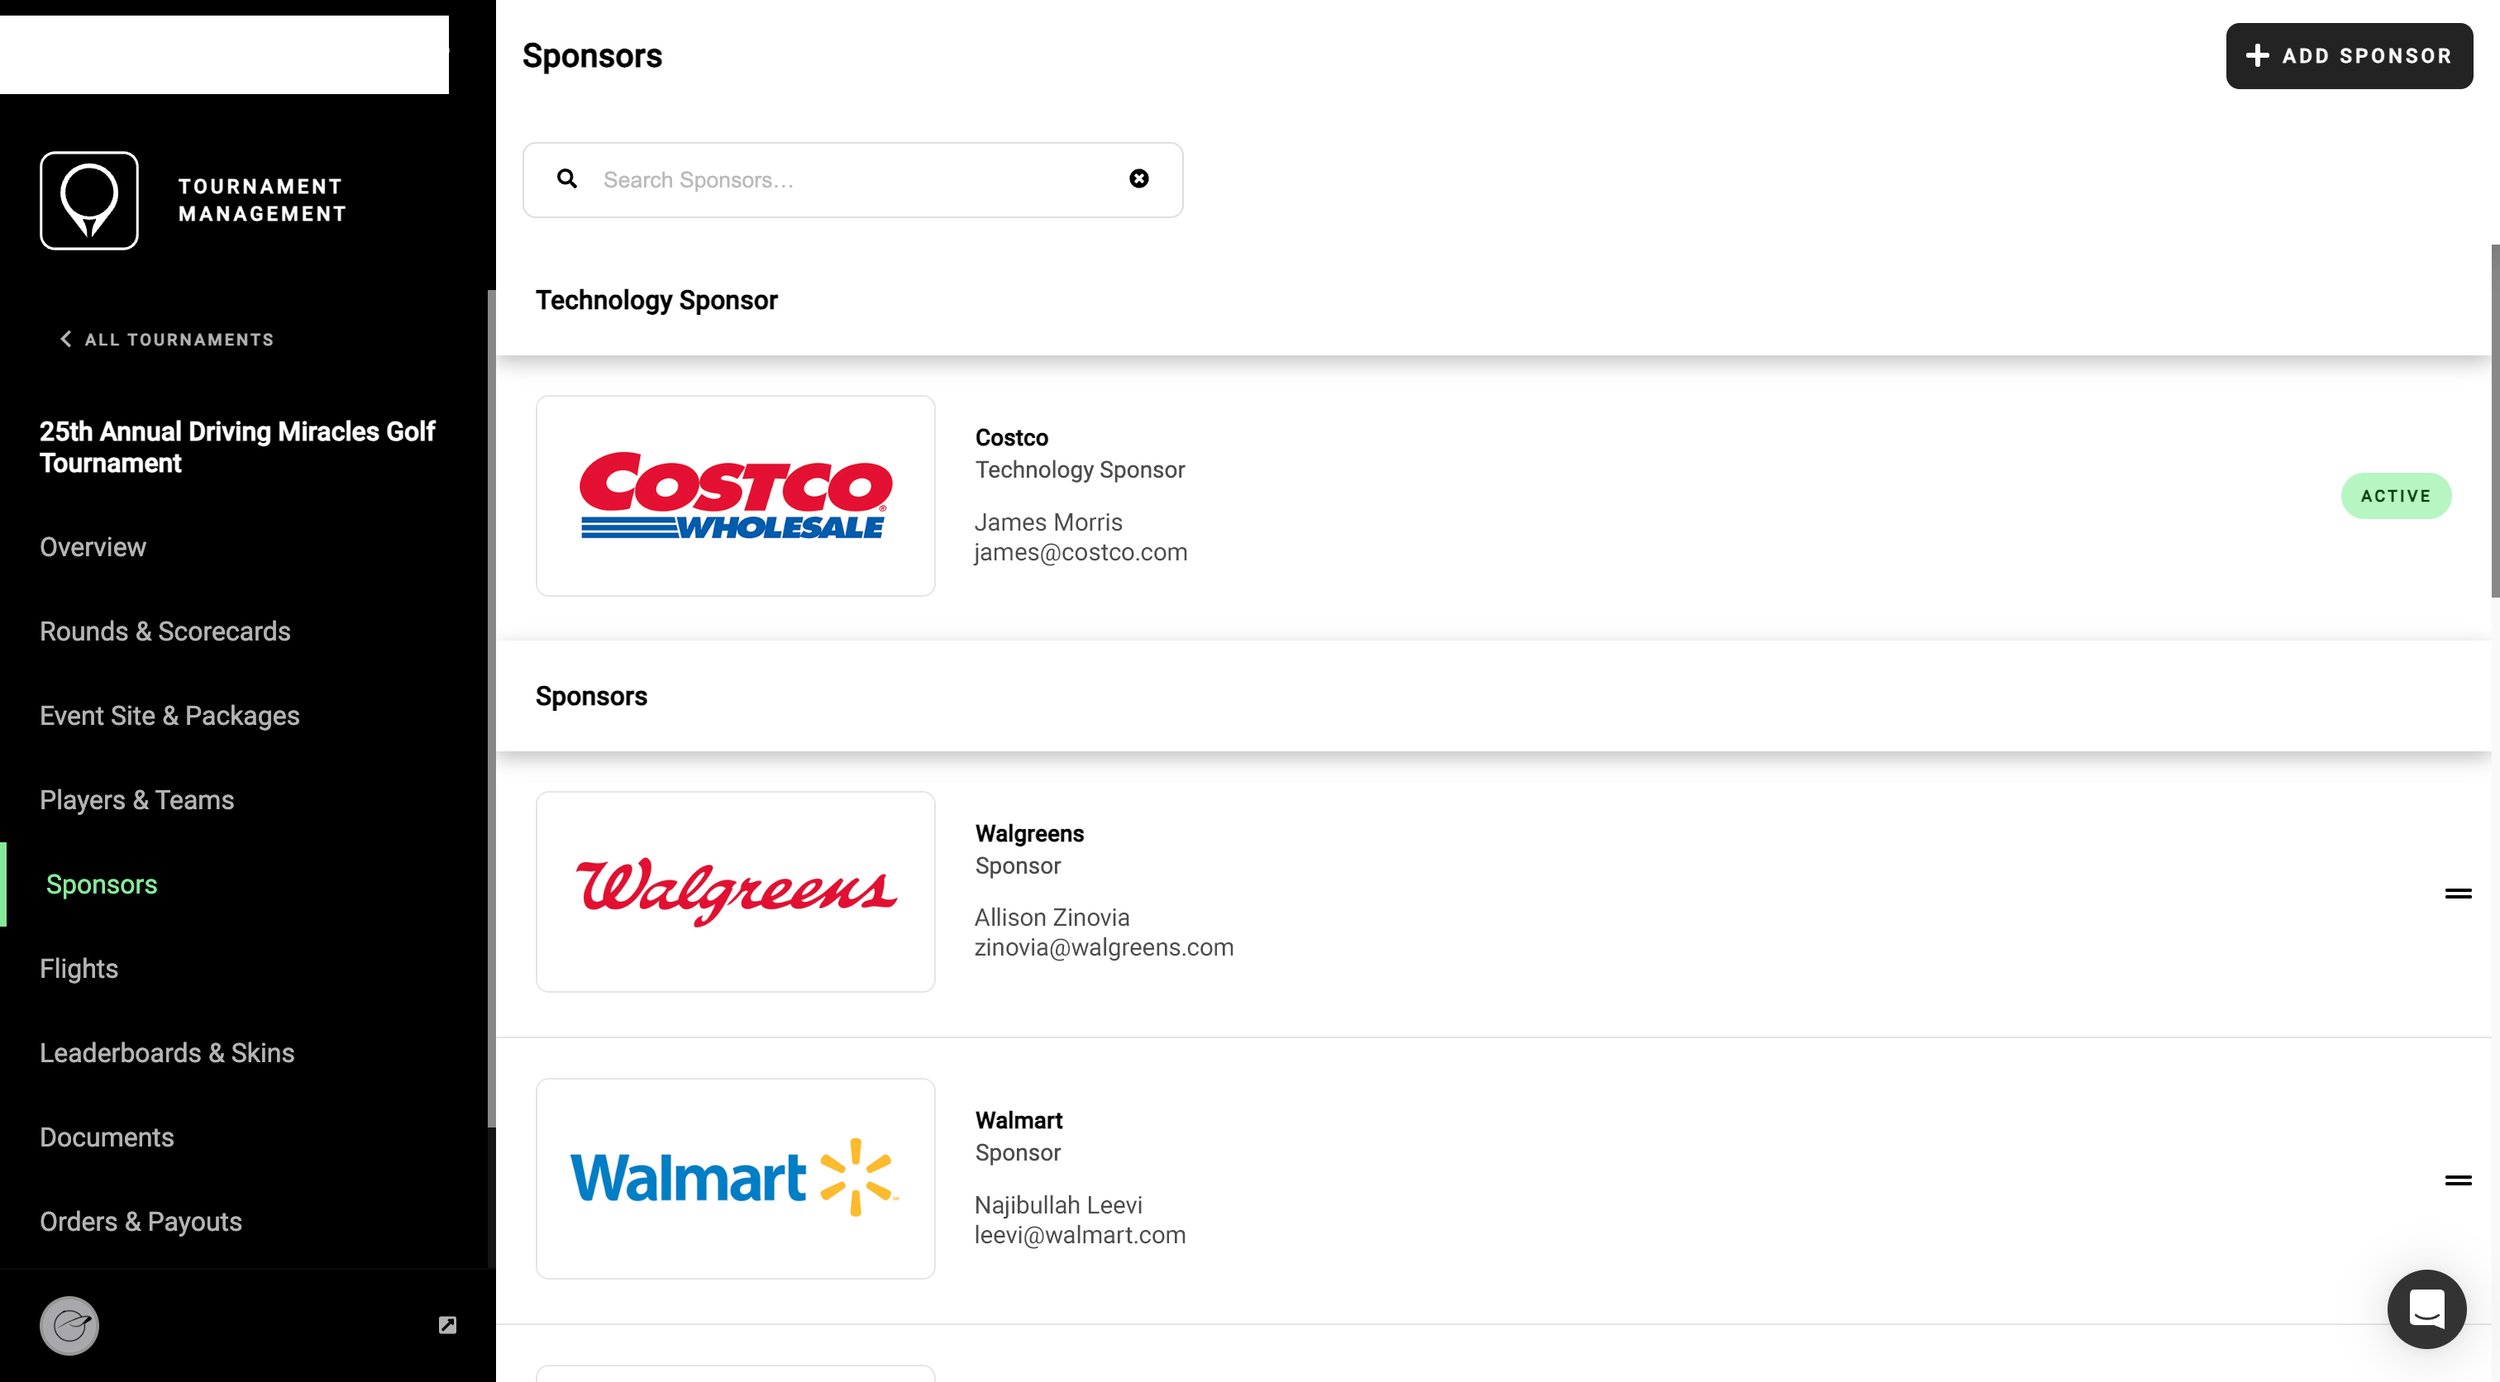 Manage sponsor logos and assets right in the platform.